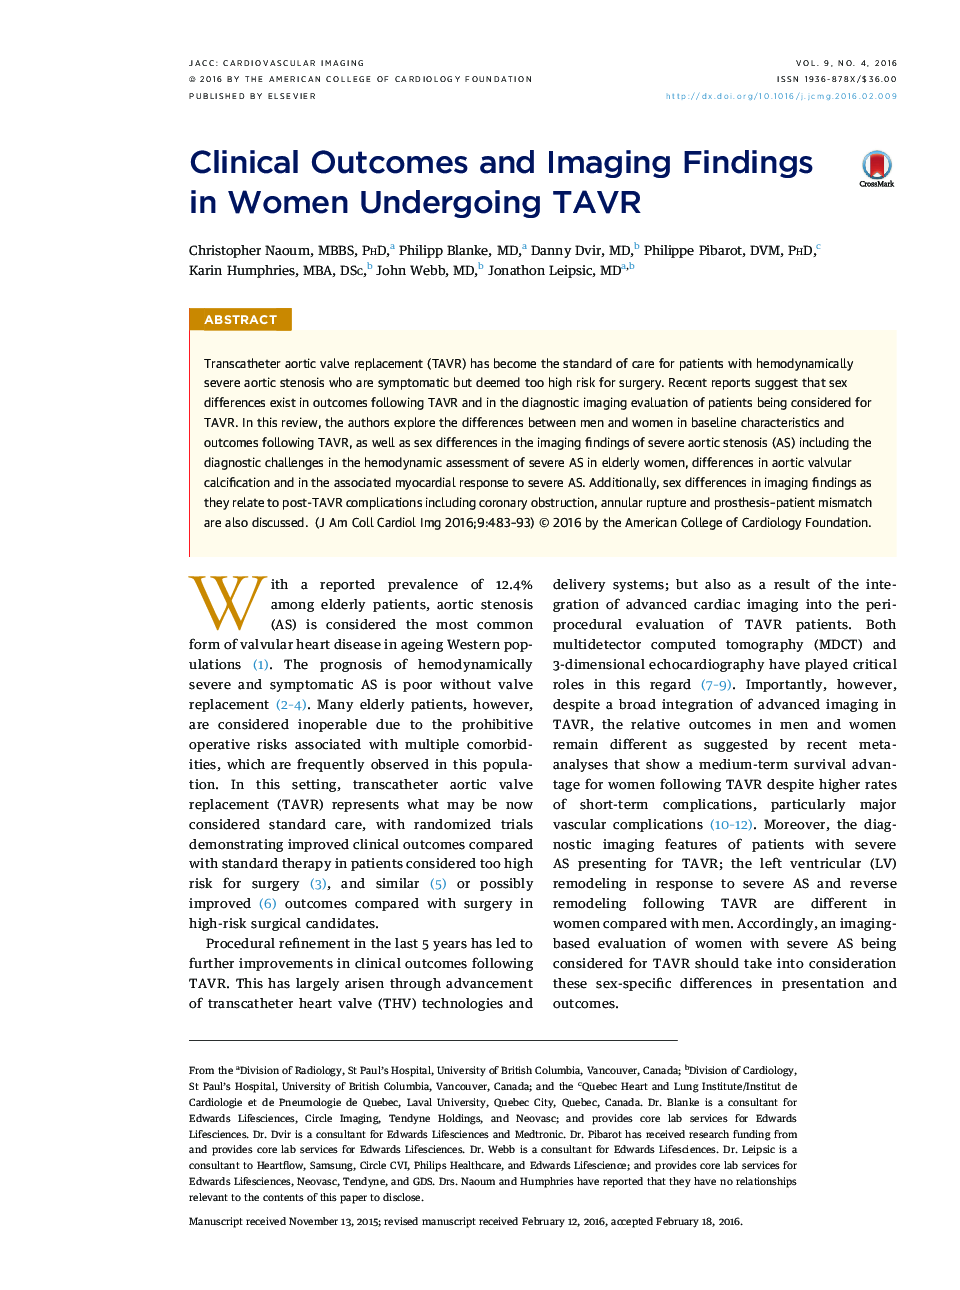 Clinical Outcomes and Imaging Findings in Women Undergoing TAVR 